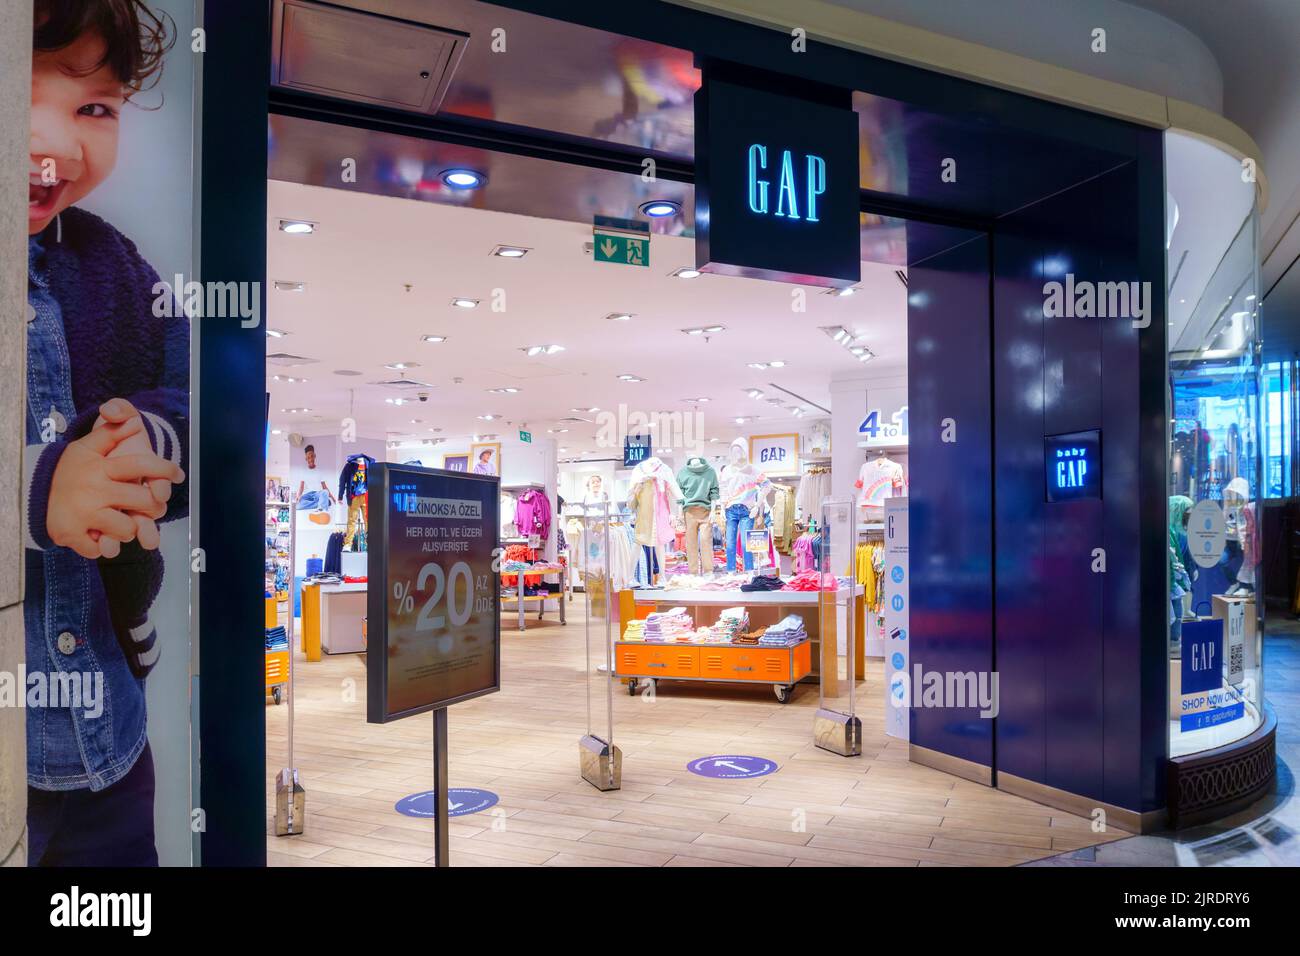 Istanbul, Turkey - Mar 20. 2022: Close-up Landscape View of GAP Store inside Demiroren Istiklal Mall. Gap is an American Clothing and Accessories Reta Stock Photo